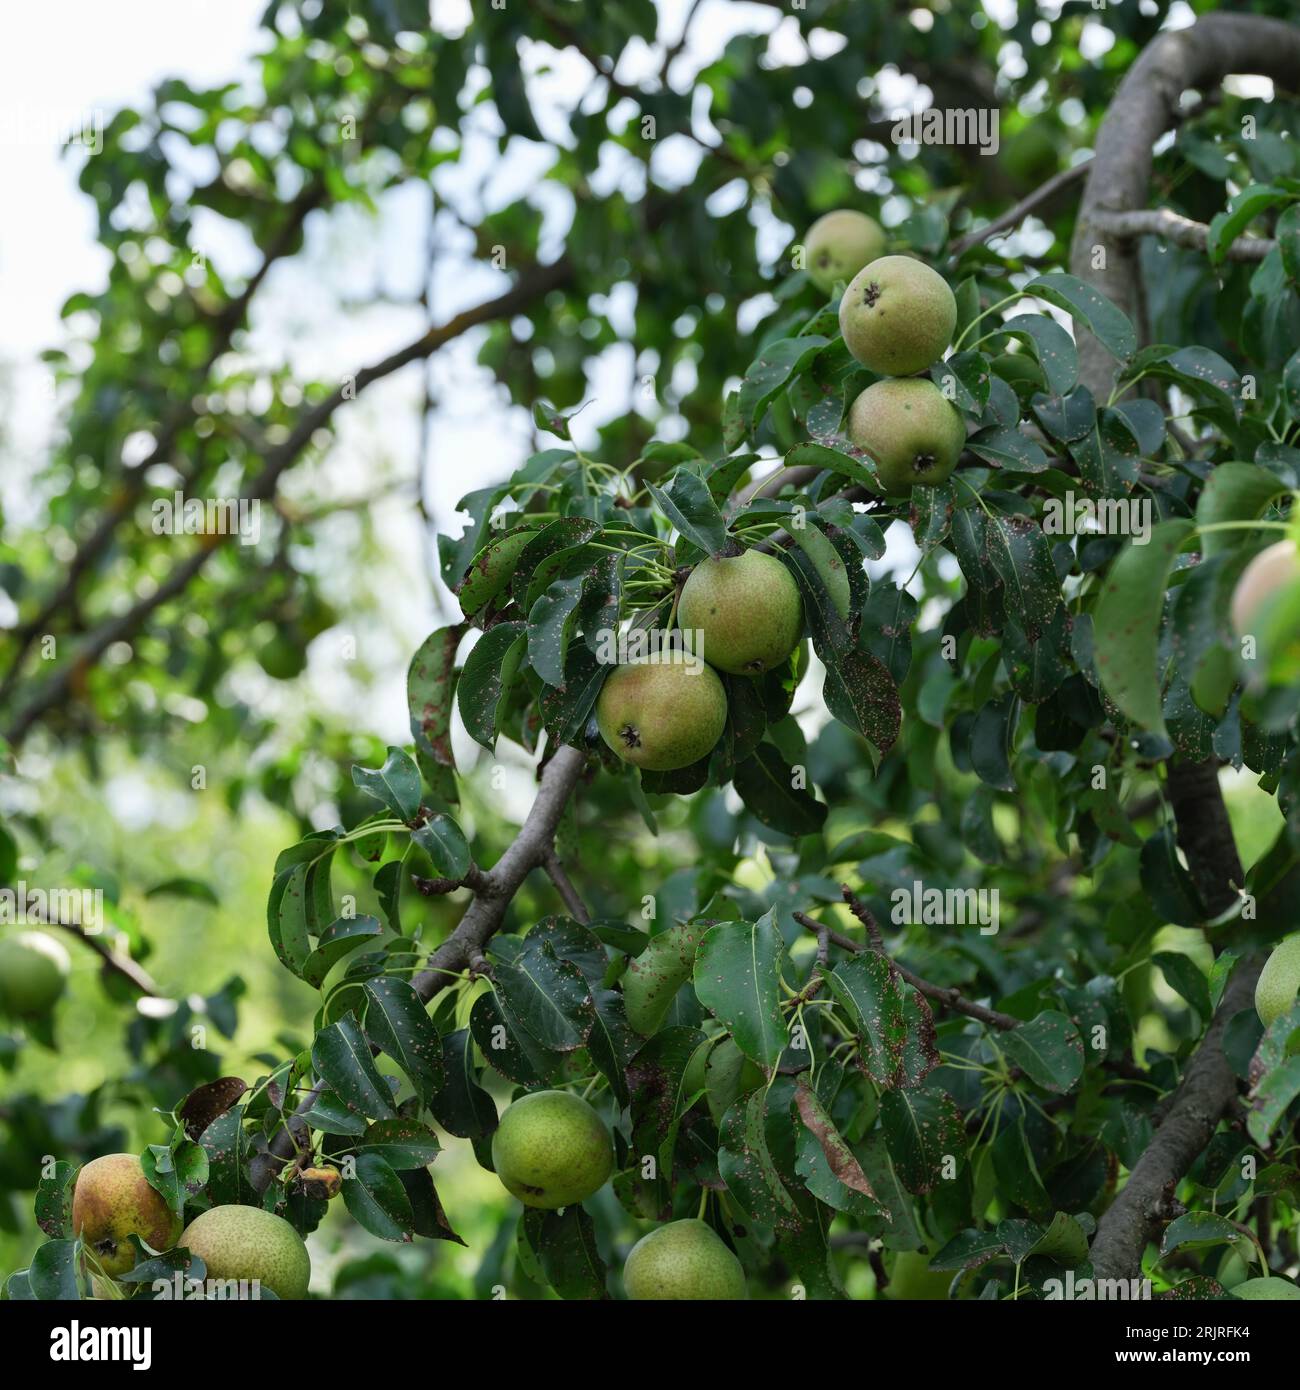 Pear tree with pears with pear scab (Venturia pyrina) disease hanging on its branches. Stock Photo